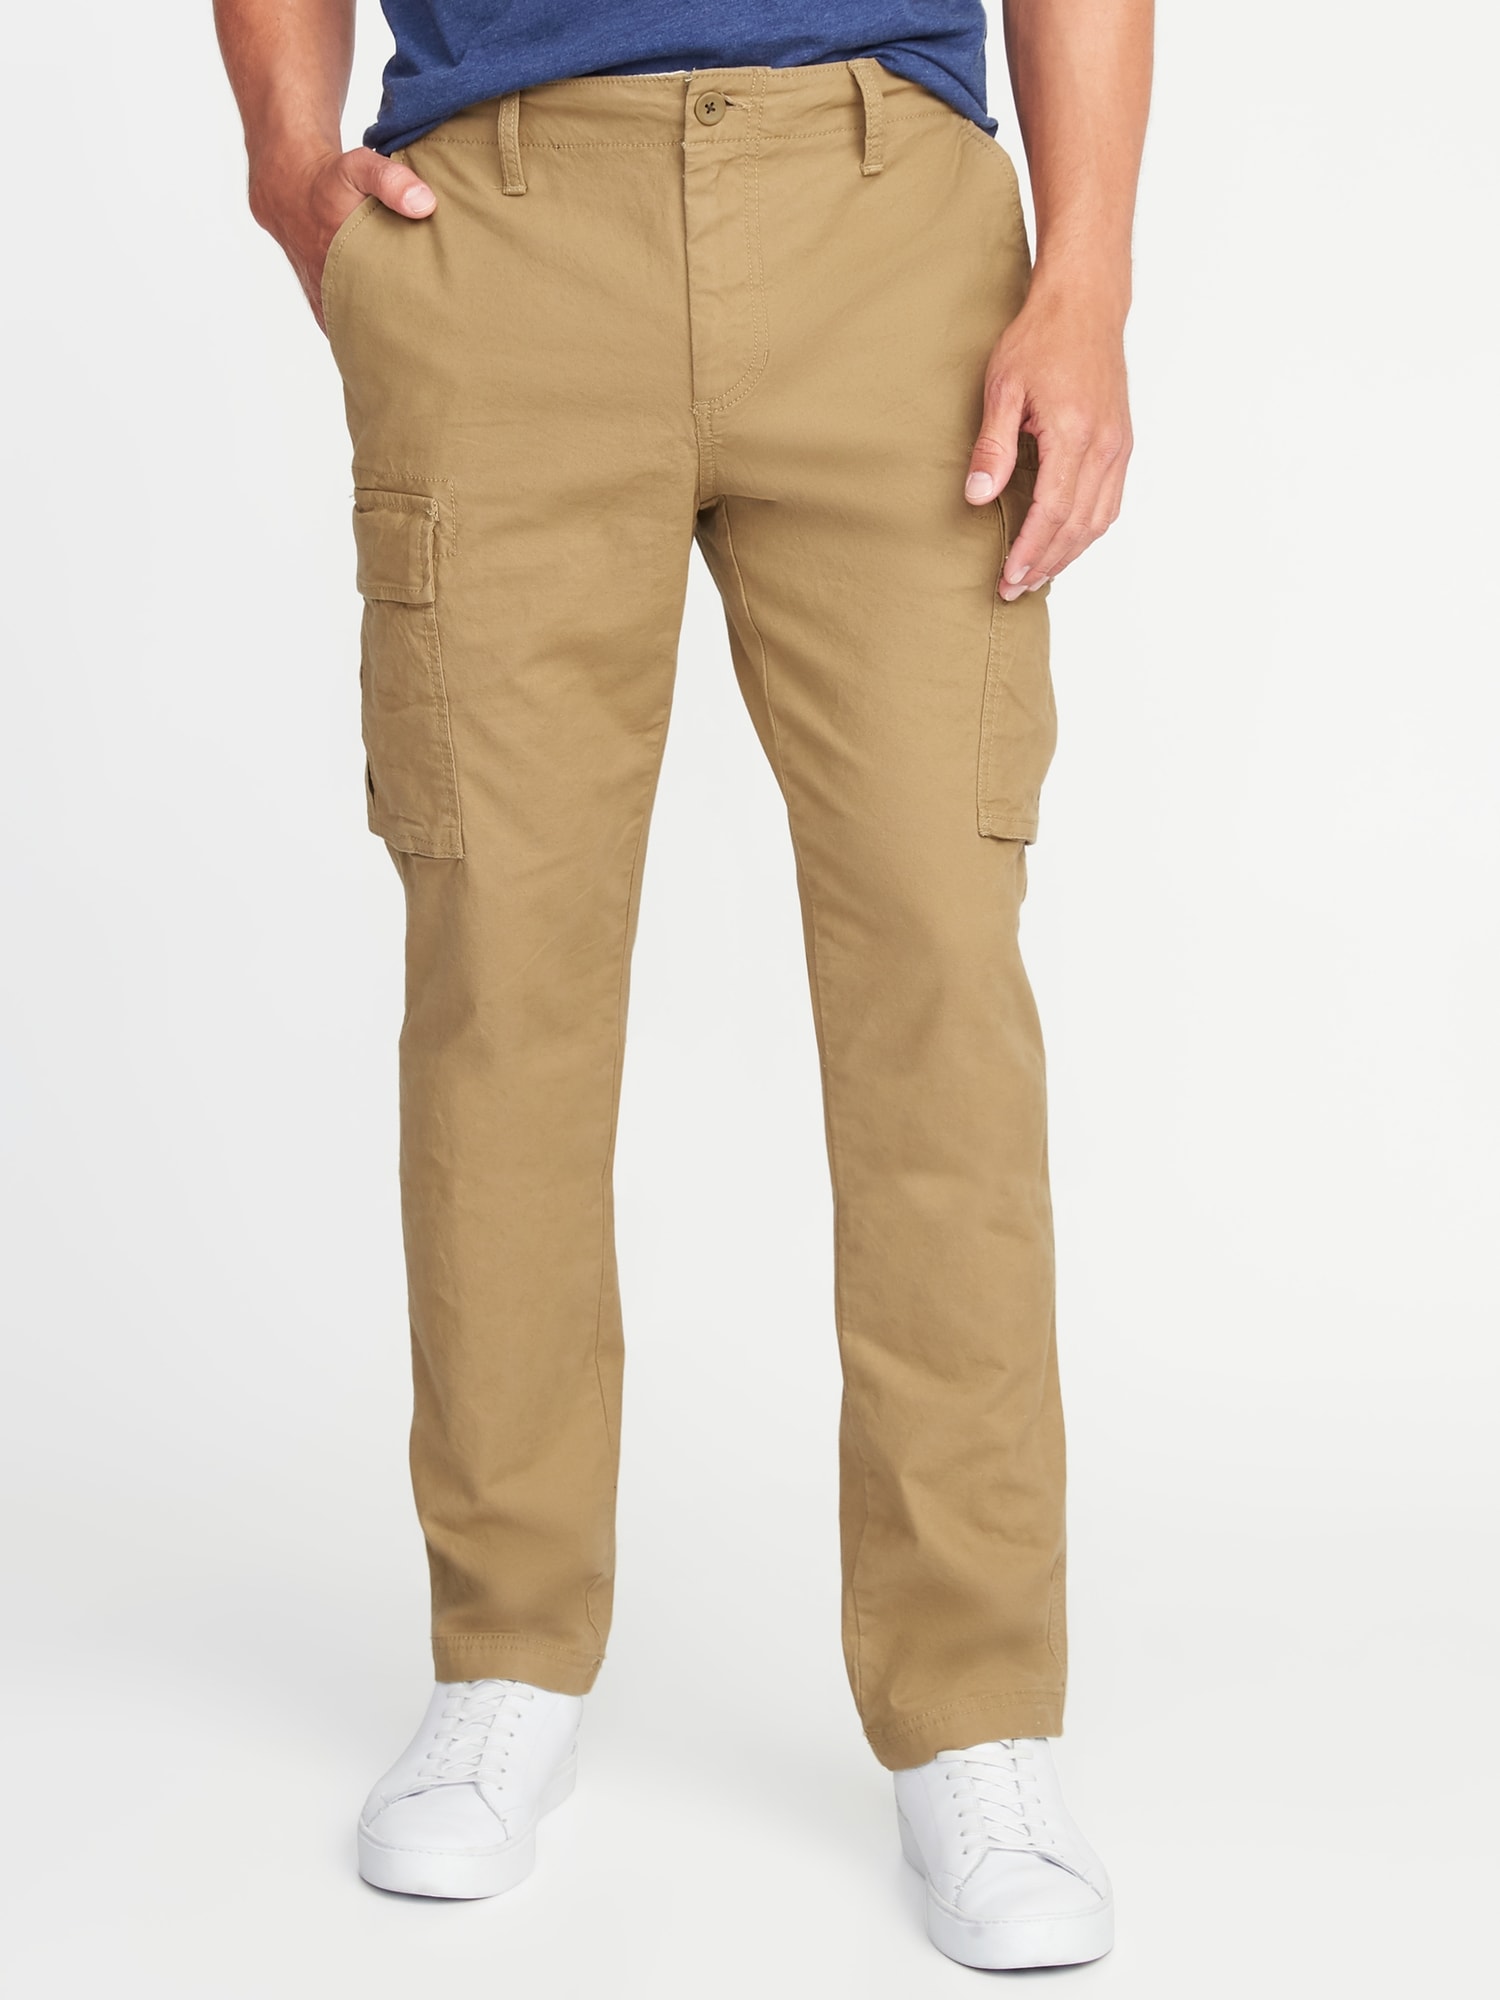 Old Navy Built-In-Flex Pants 34x34 Brown Twill Straight Stretch Flat Front